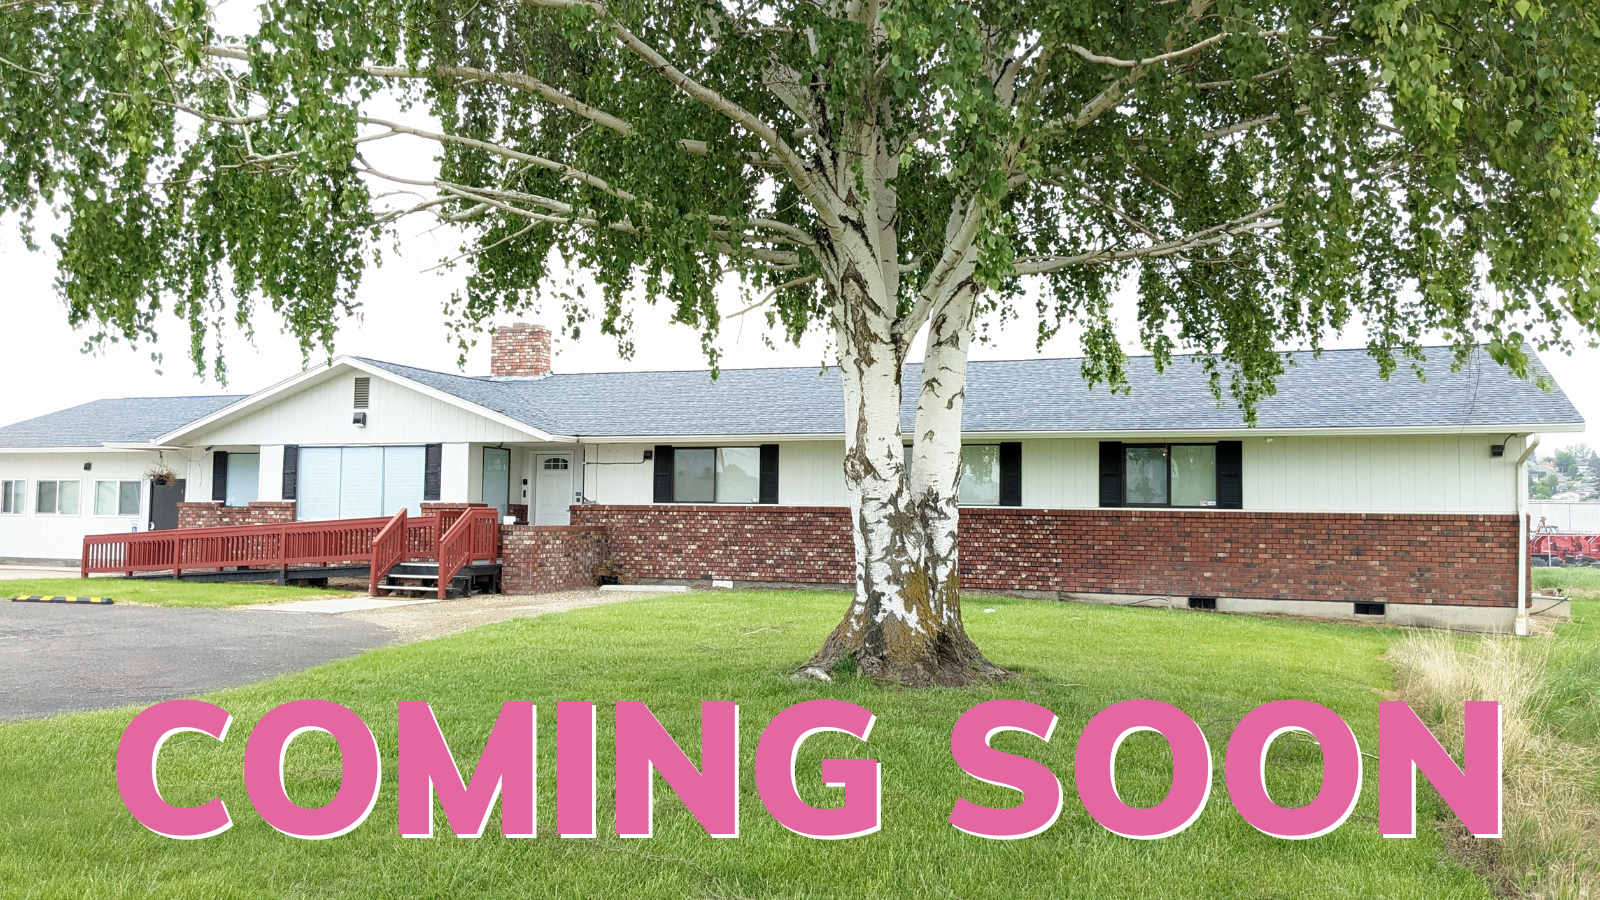 Photo of the Heartlinks Adult Family Home with text overlay that says "Coming Soon".